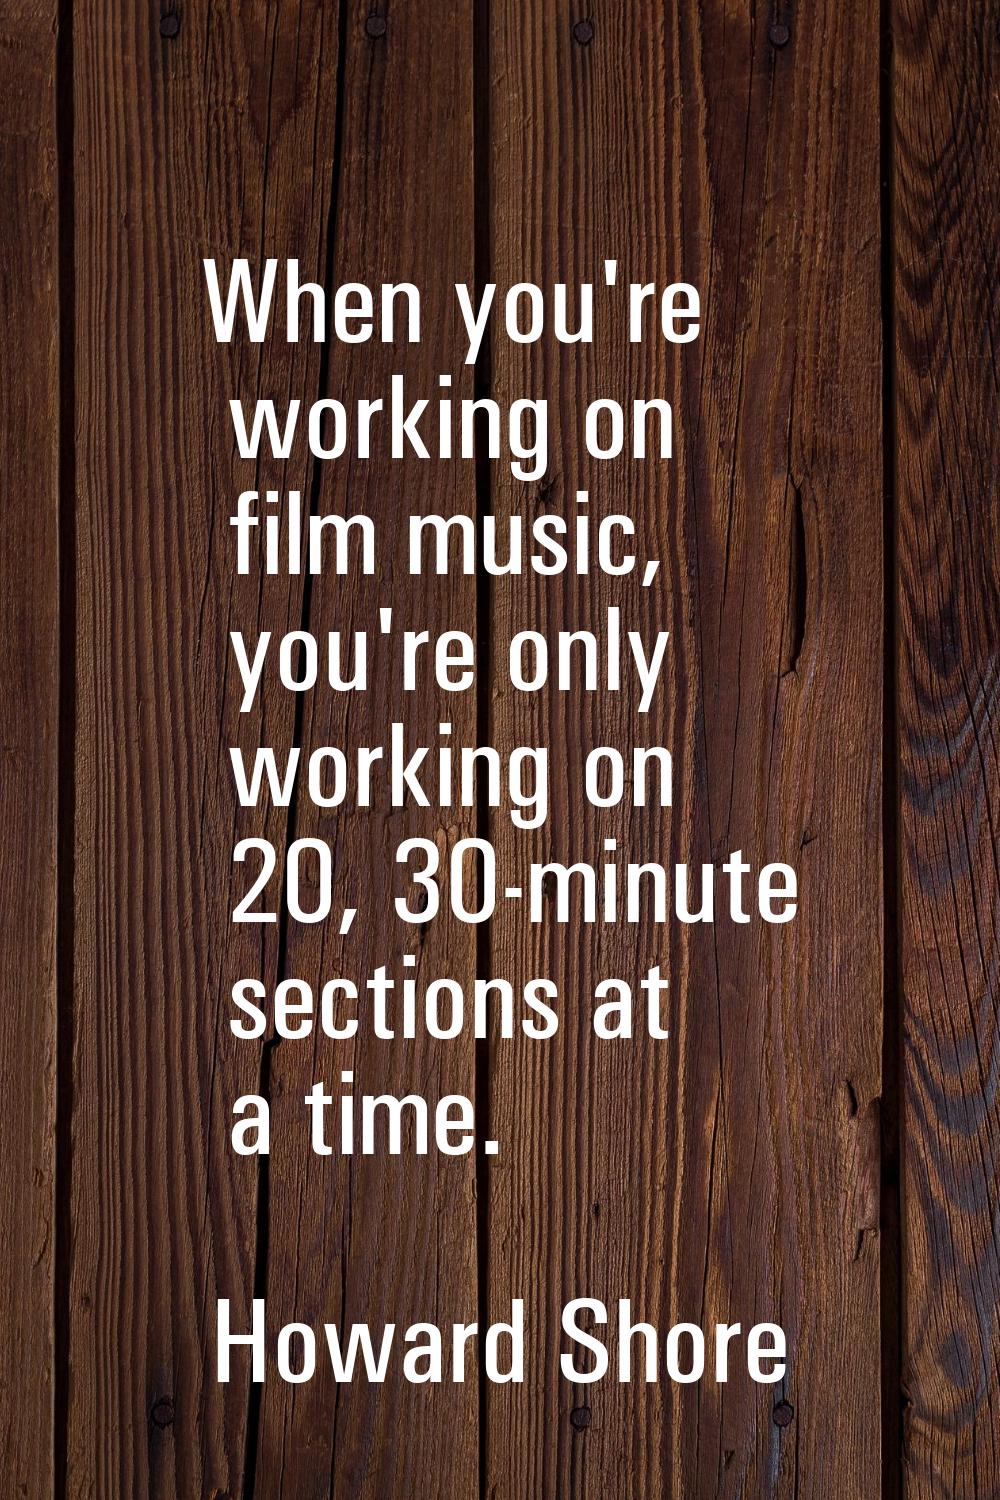 When you're working on film music, you're only working on 20, 30-minute sections at a time.